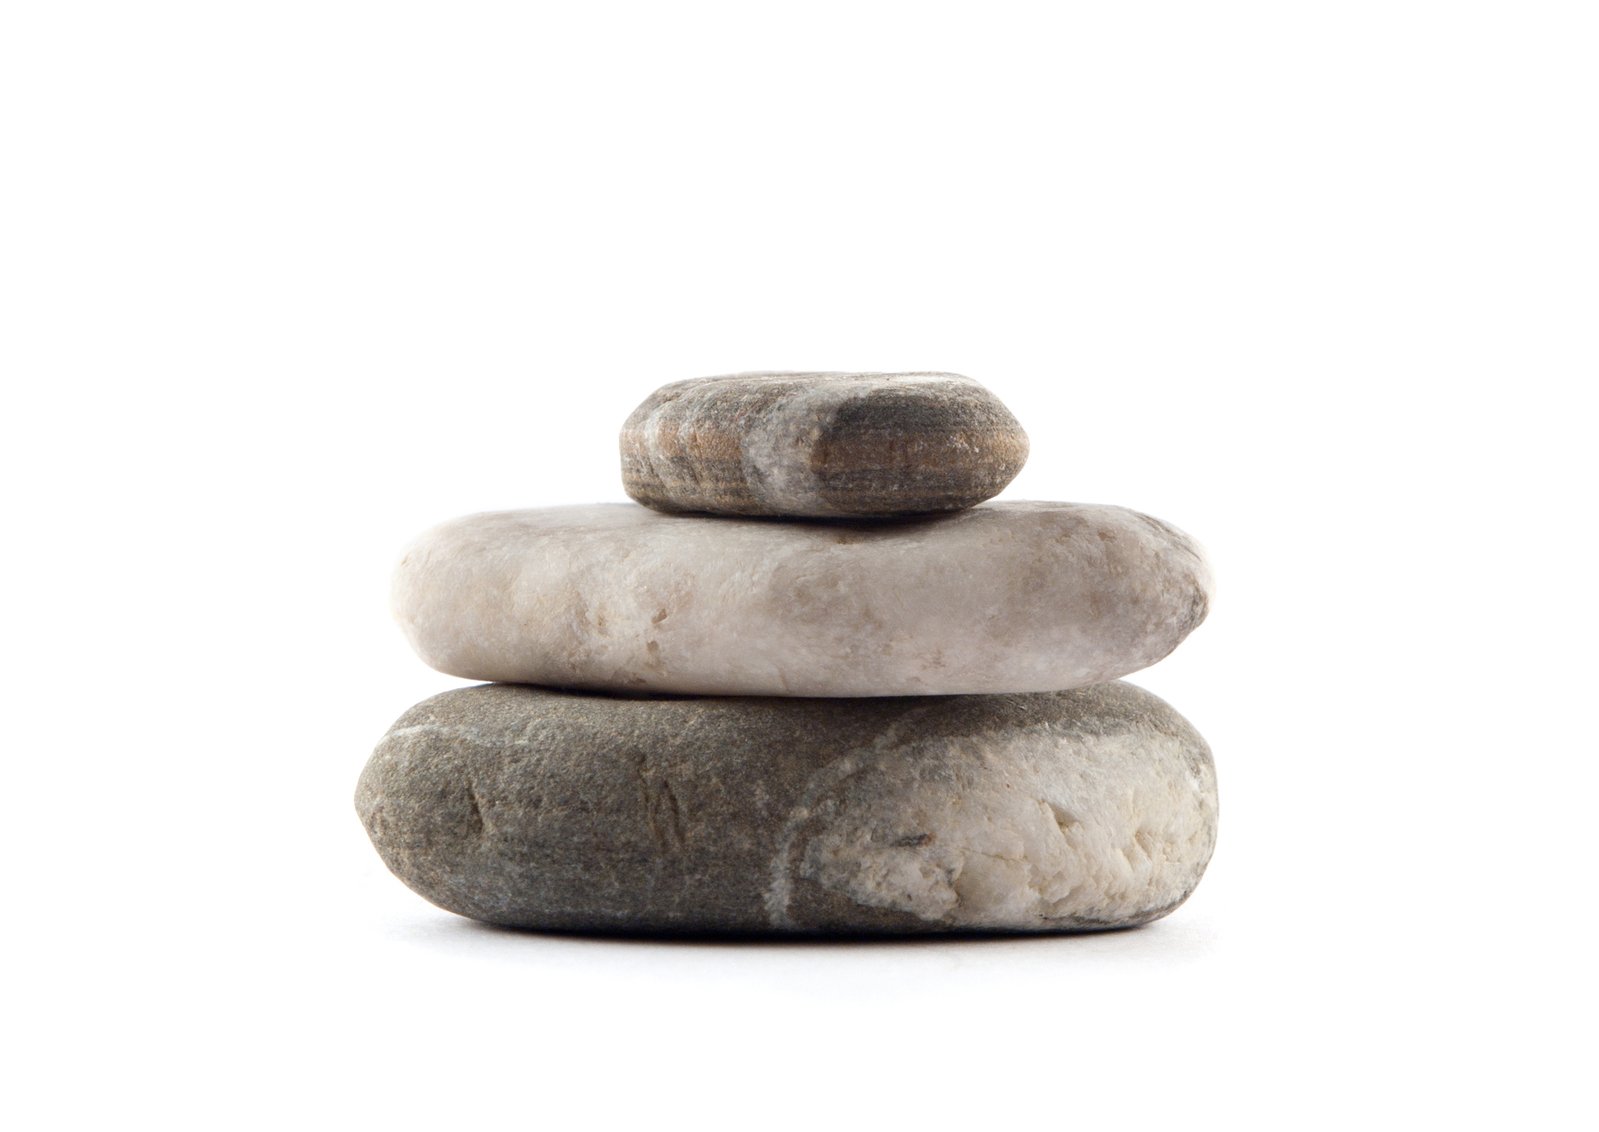 two large stones stacked on each other in front of a white background